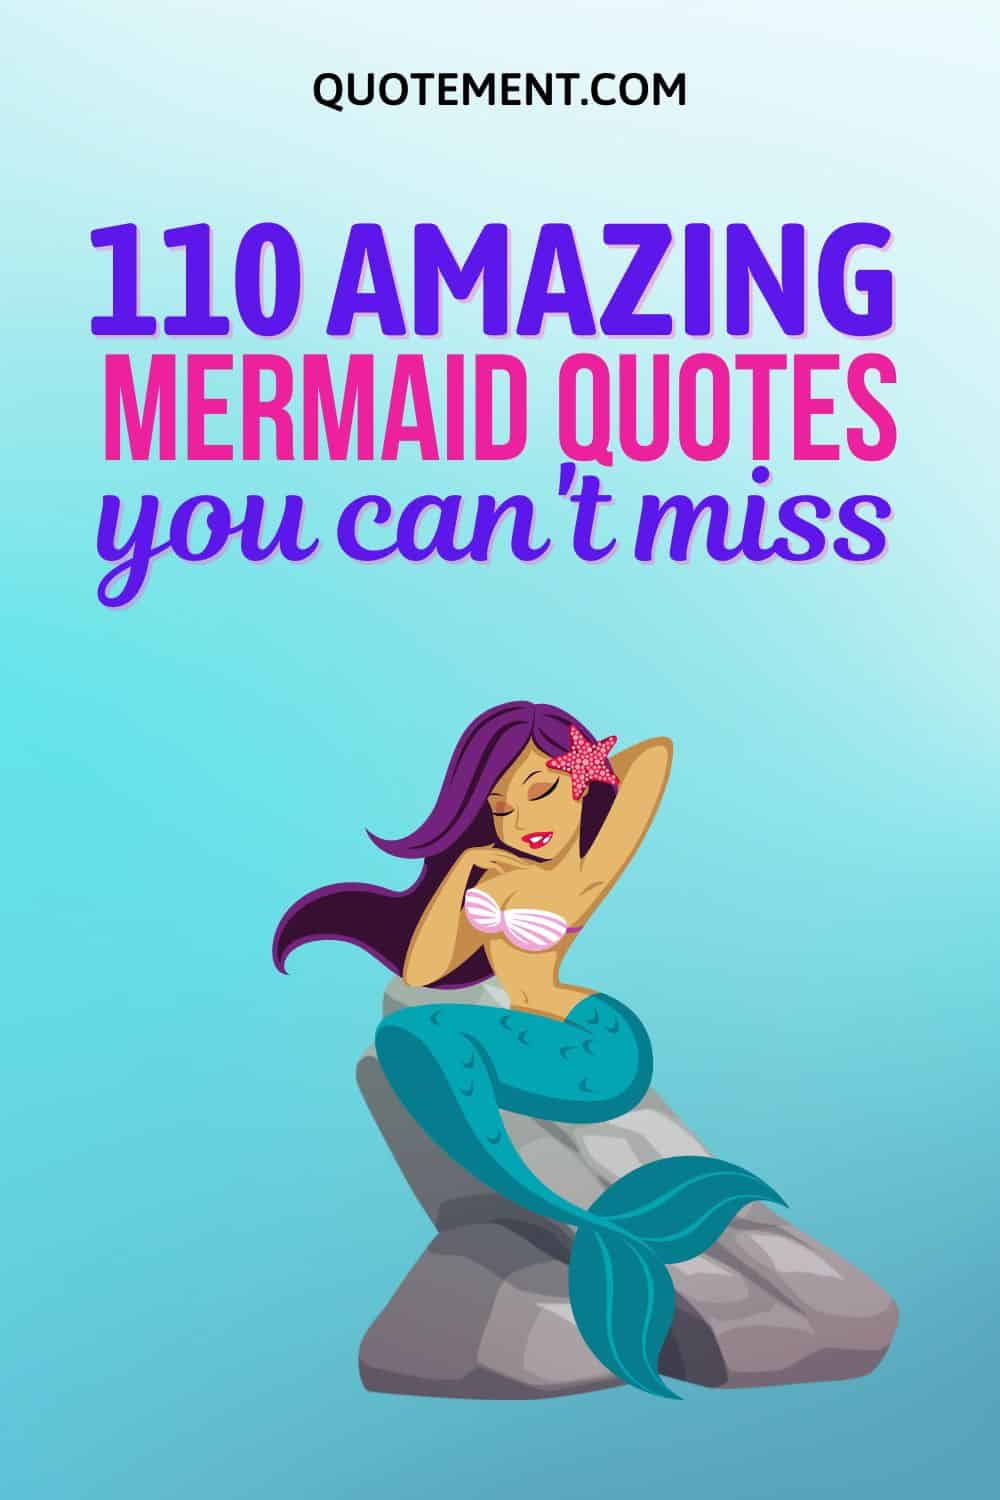 110 Powerful Mermaid Quotes That Are Sure To Amaze You
